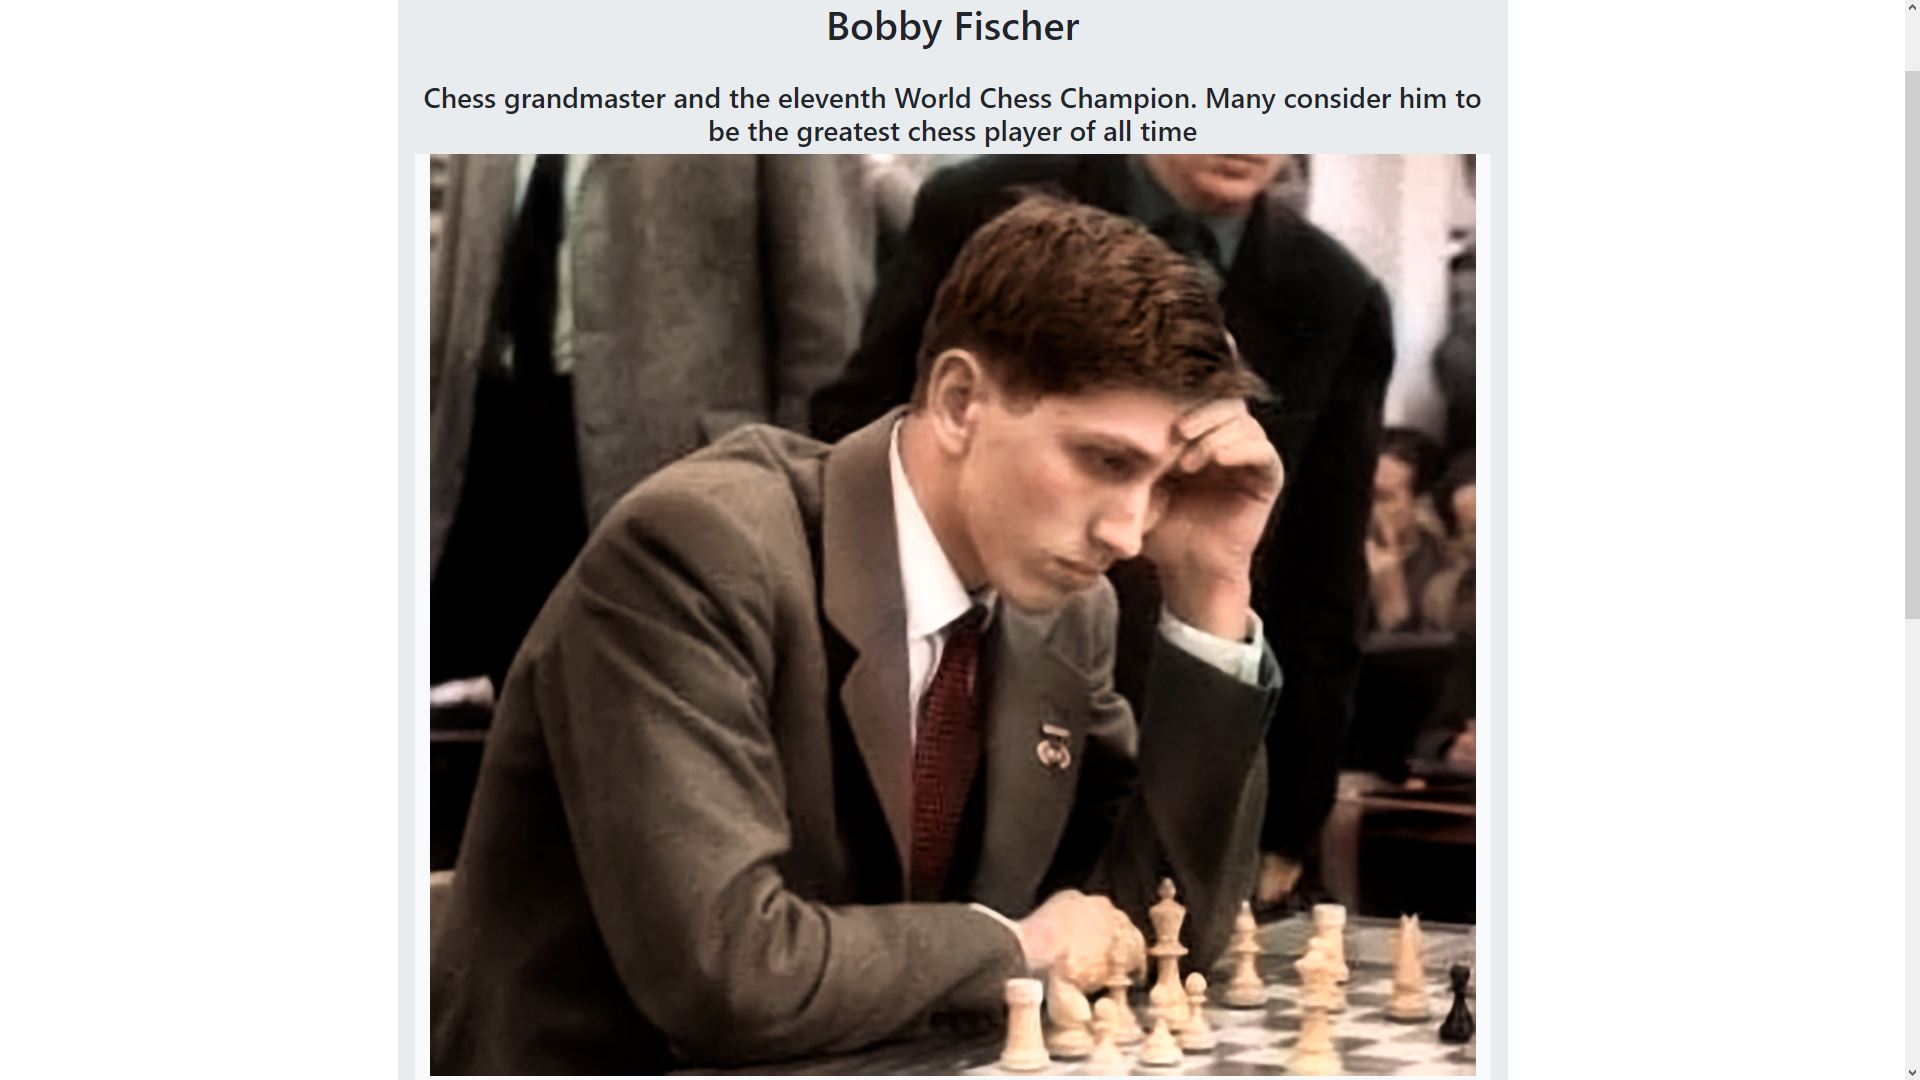 Link to portfolio project about Bobby Fisher